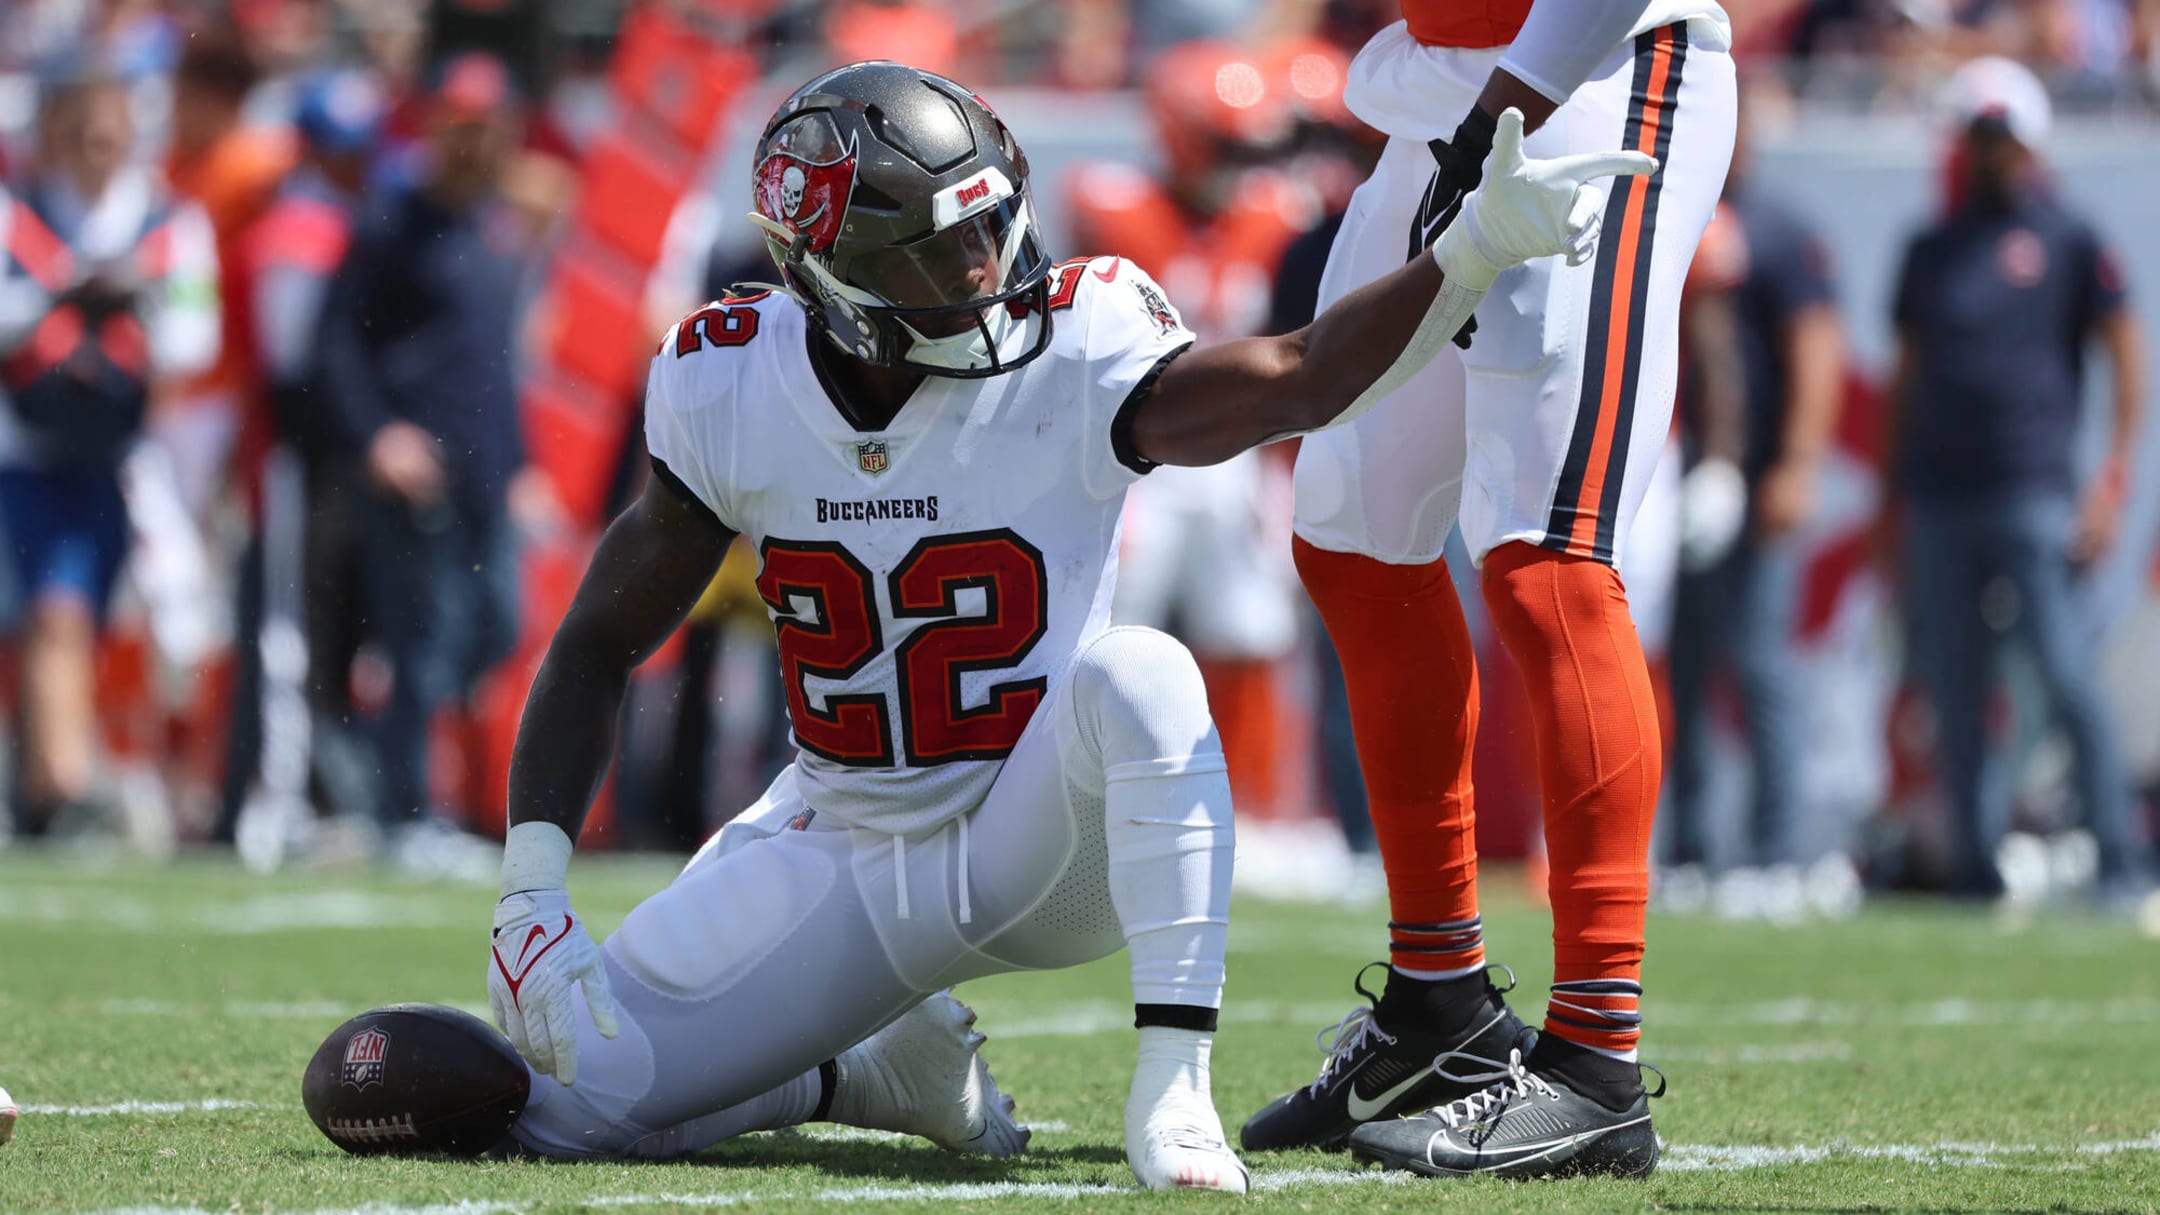 Bucs Place RB On IR, Promote DL To Active Roster